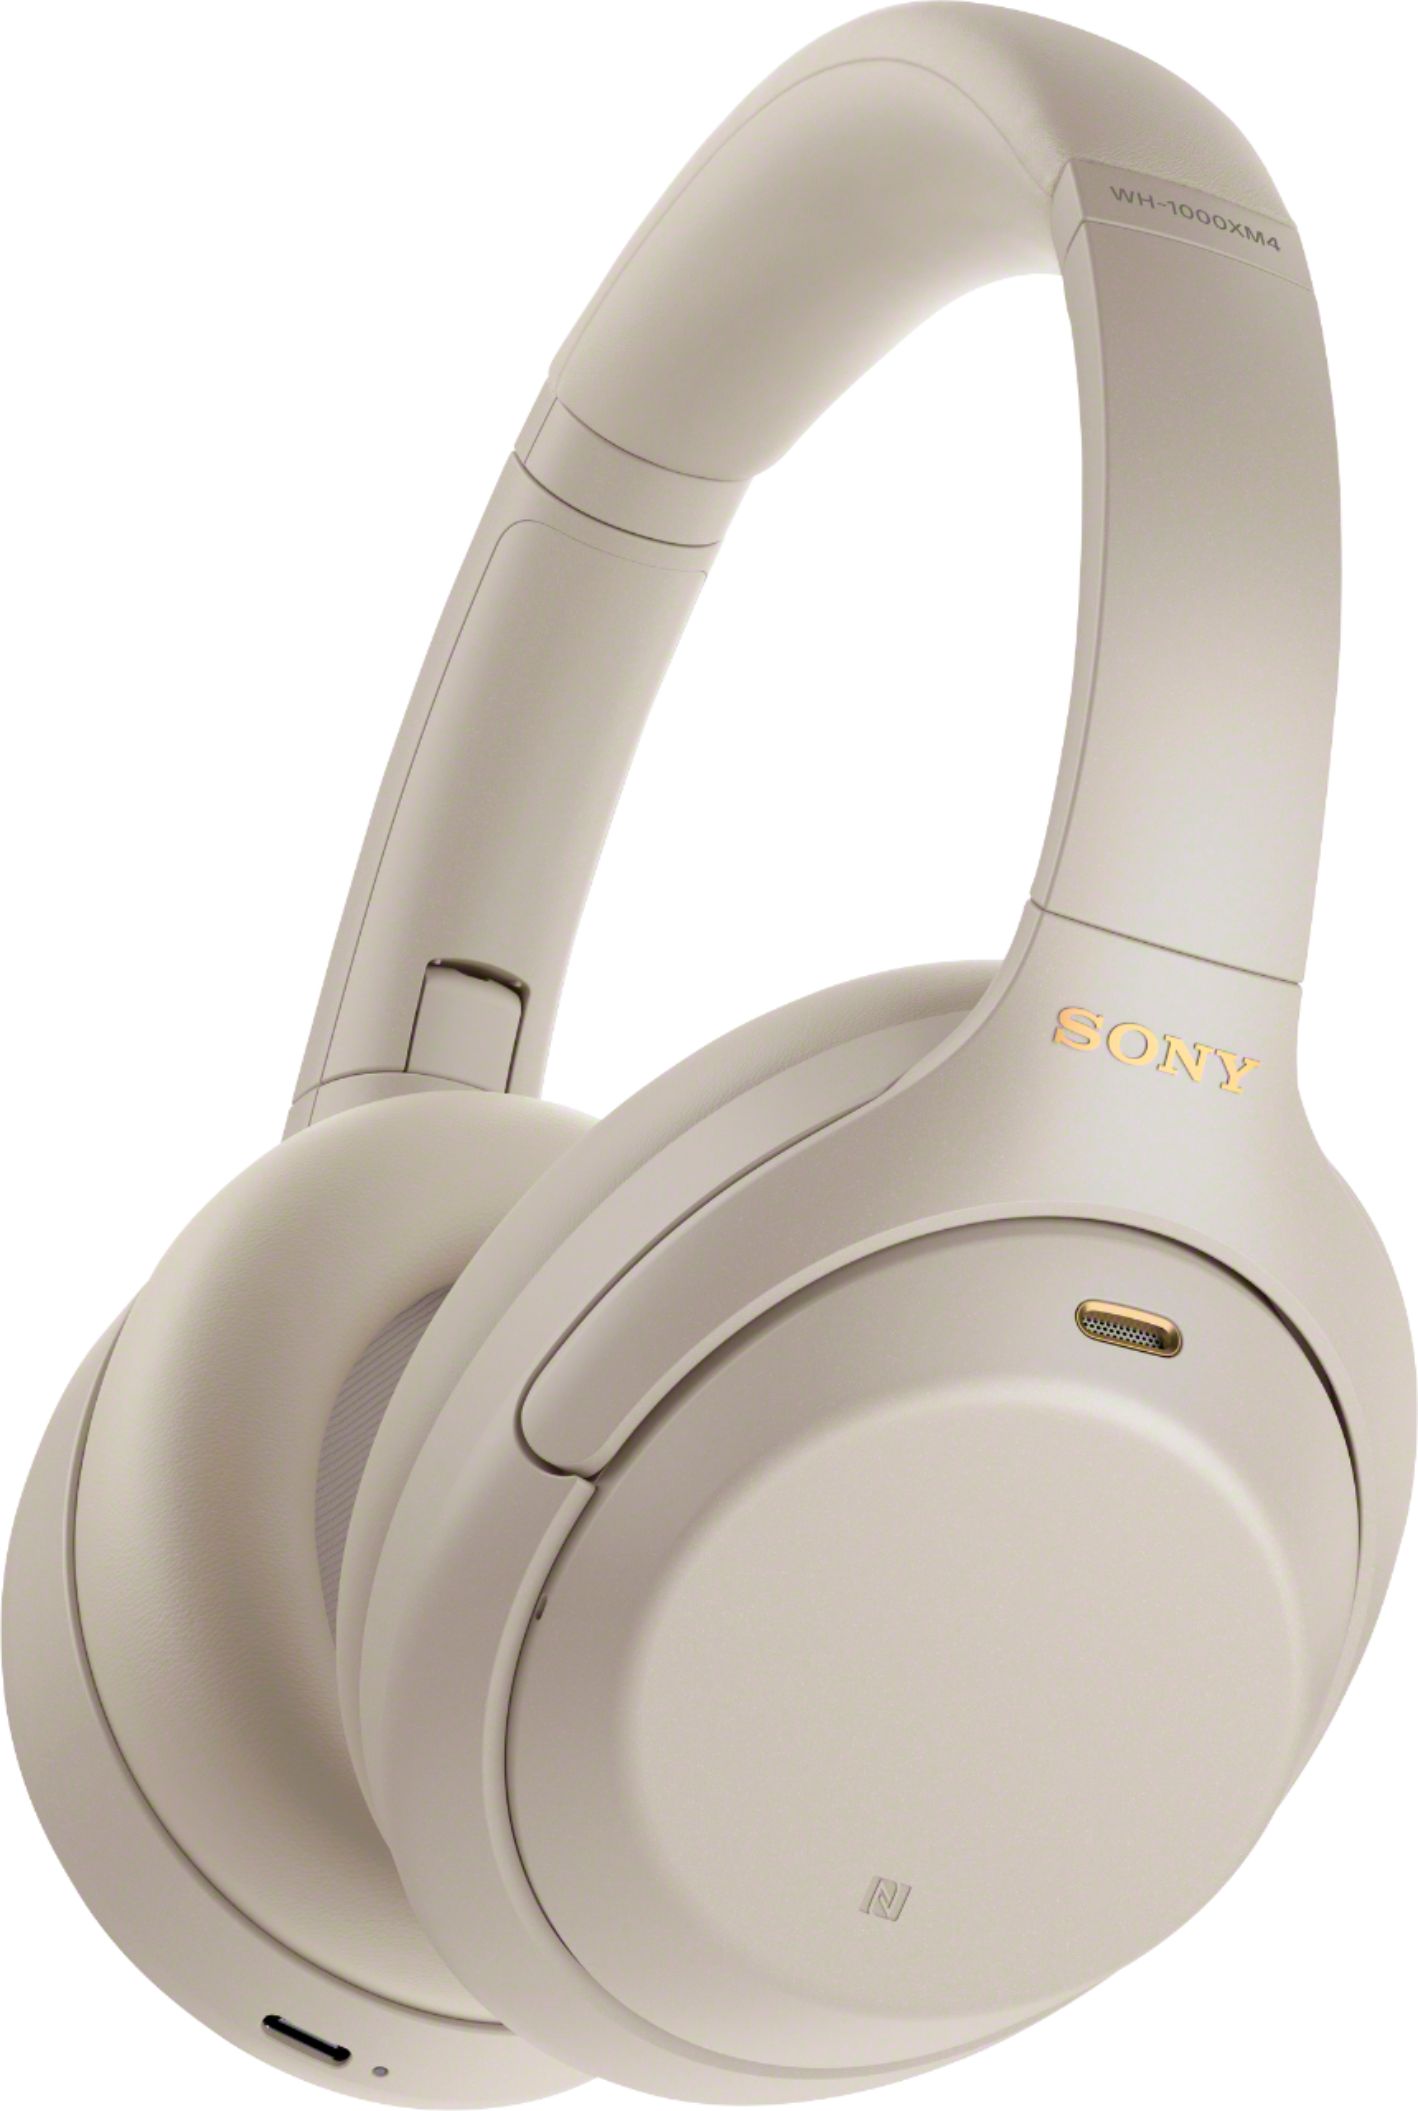 Sony WH-1000XM4 Wireless Noise-Cancelling Over-the-Ear ...